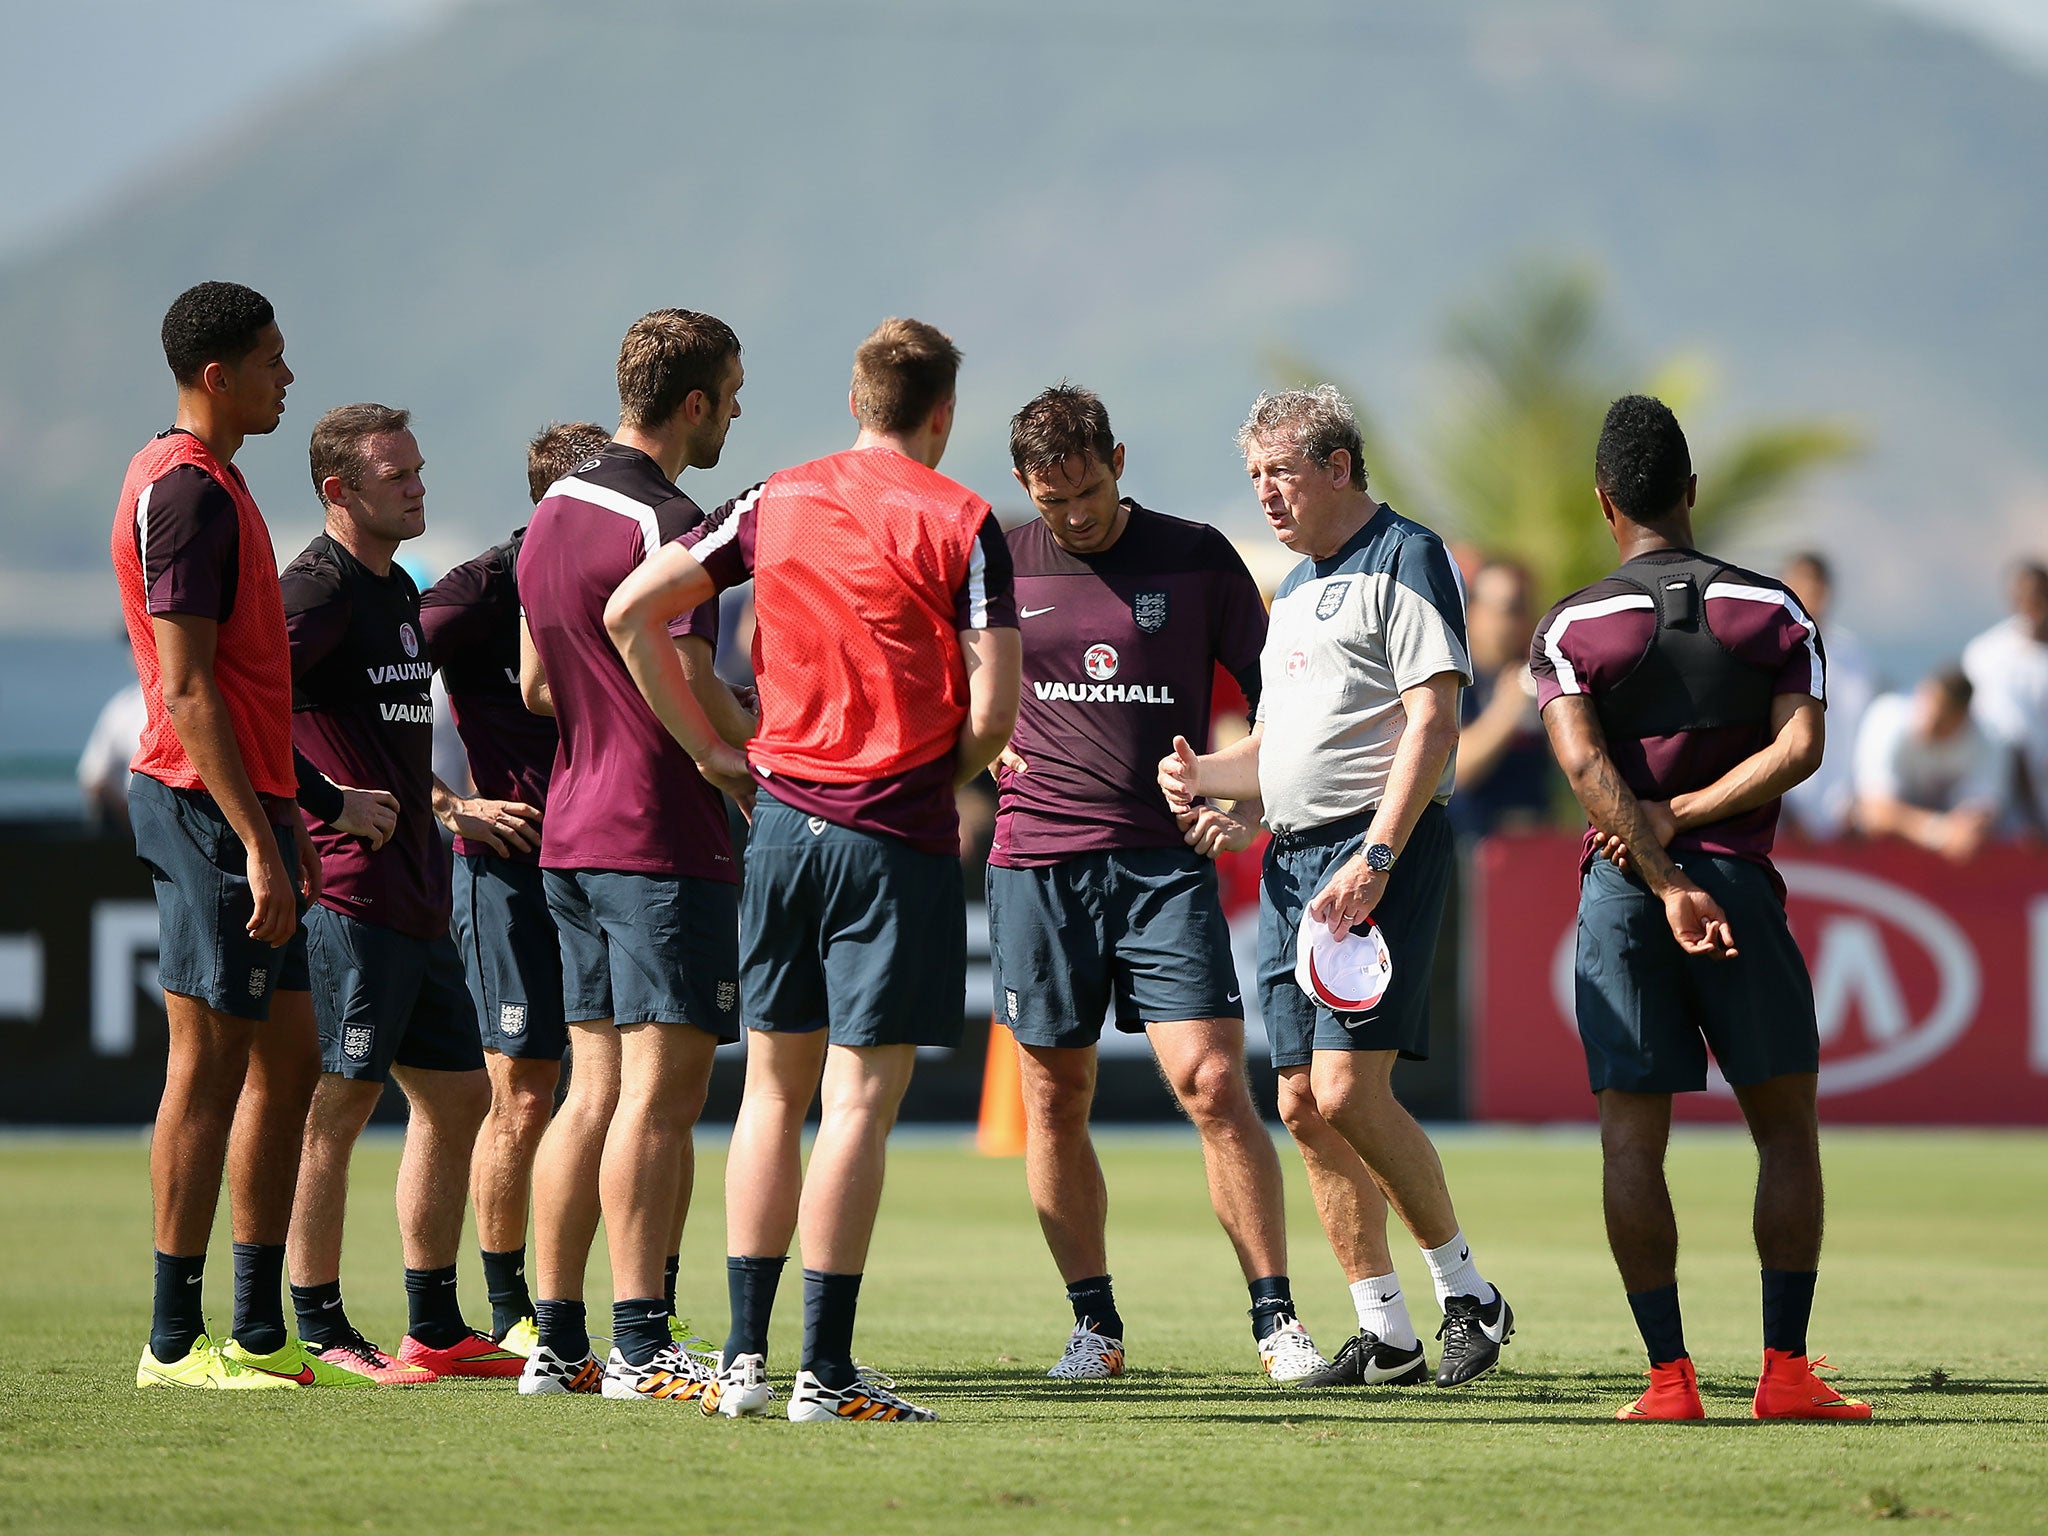 Roy Hodgson gives instructions to players during a training session at the Urca military base in Rio de Janeiro, Brazil.